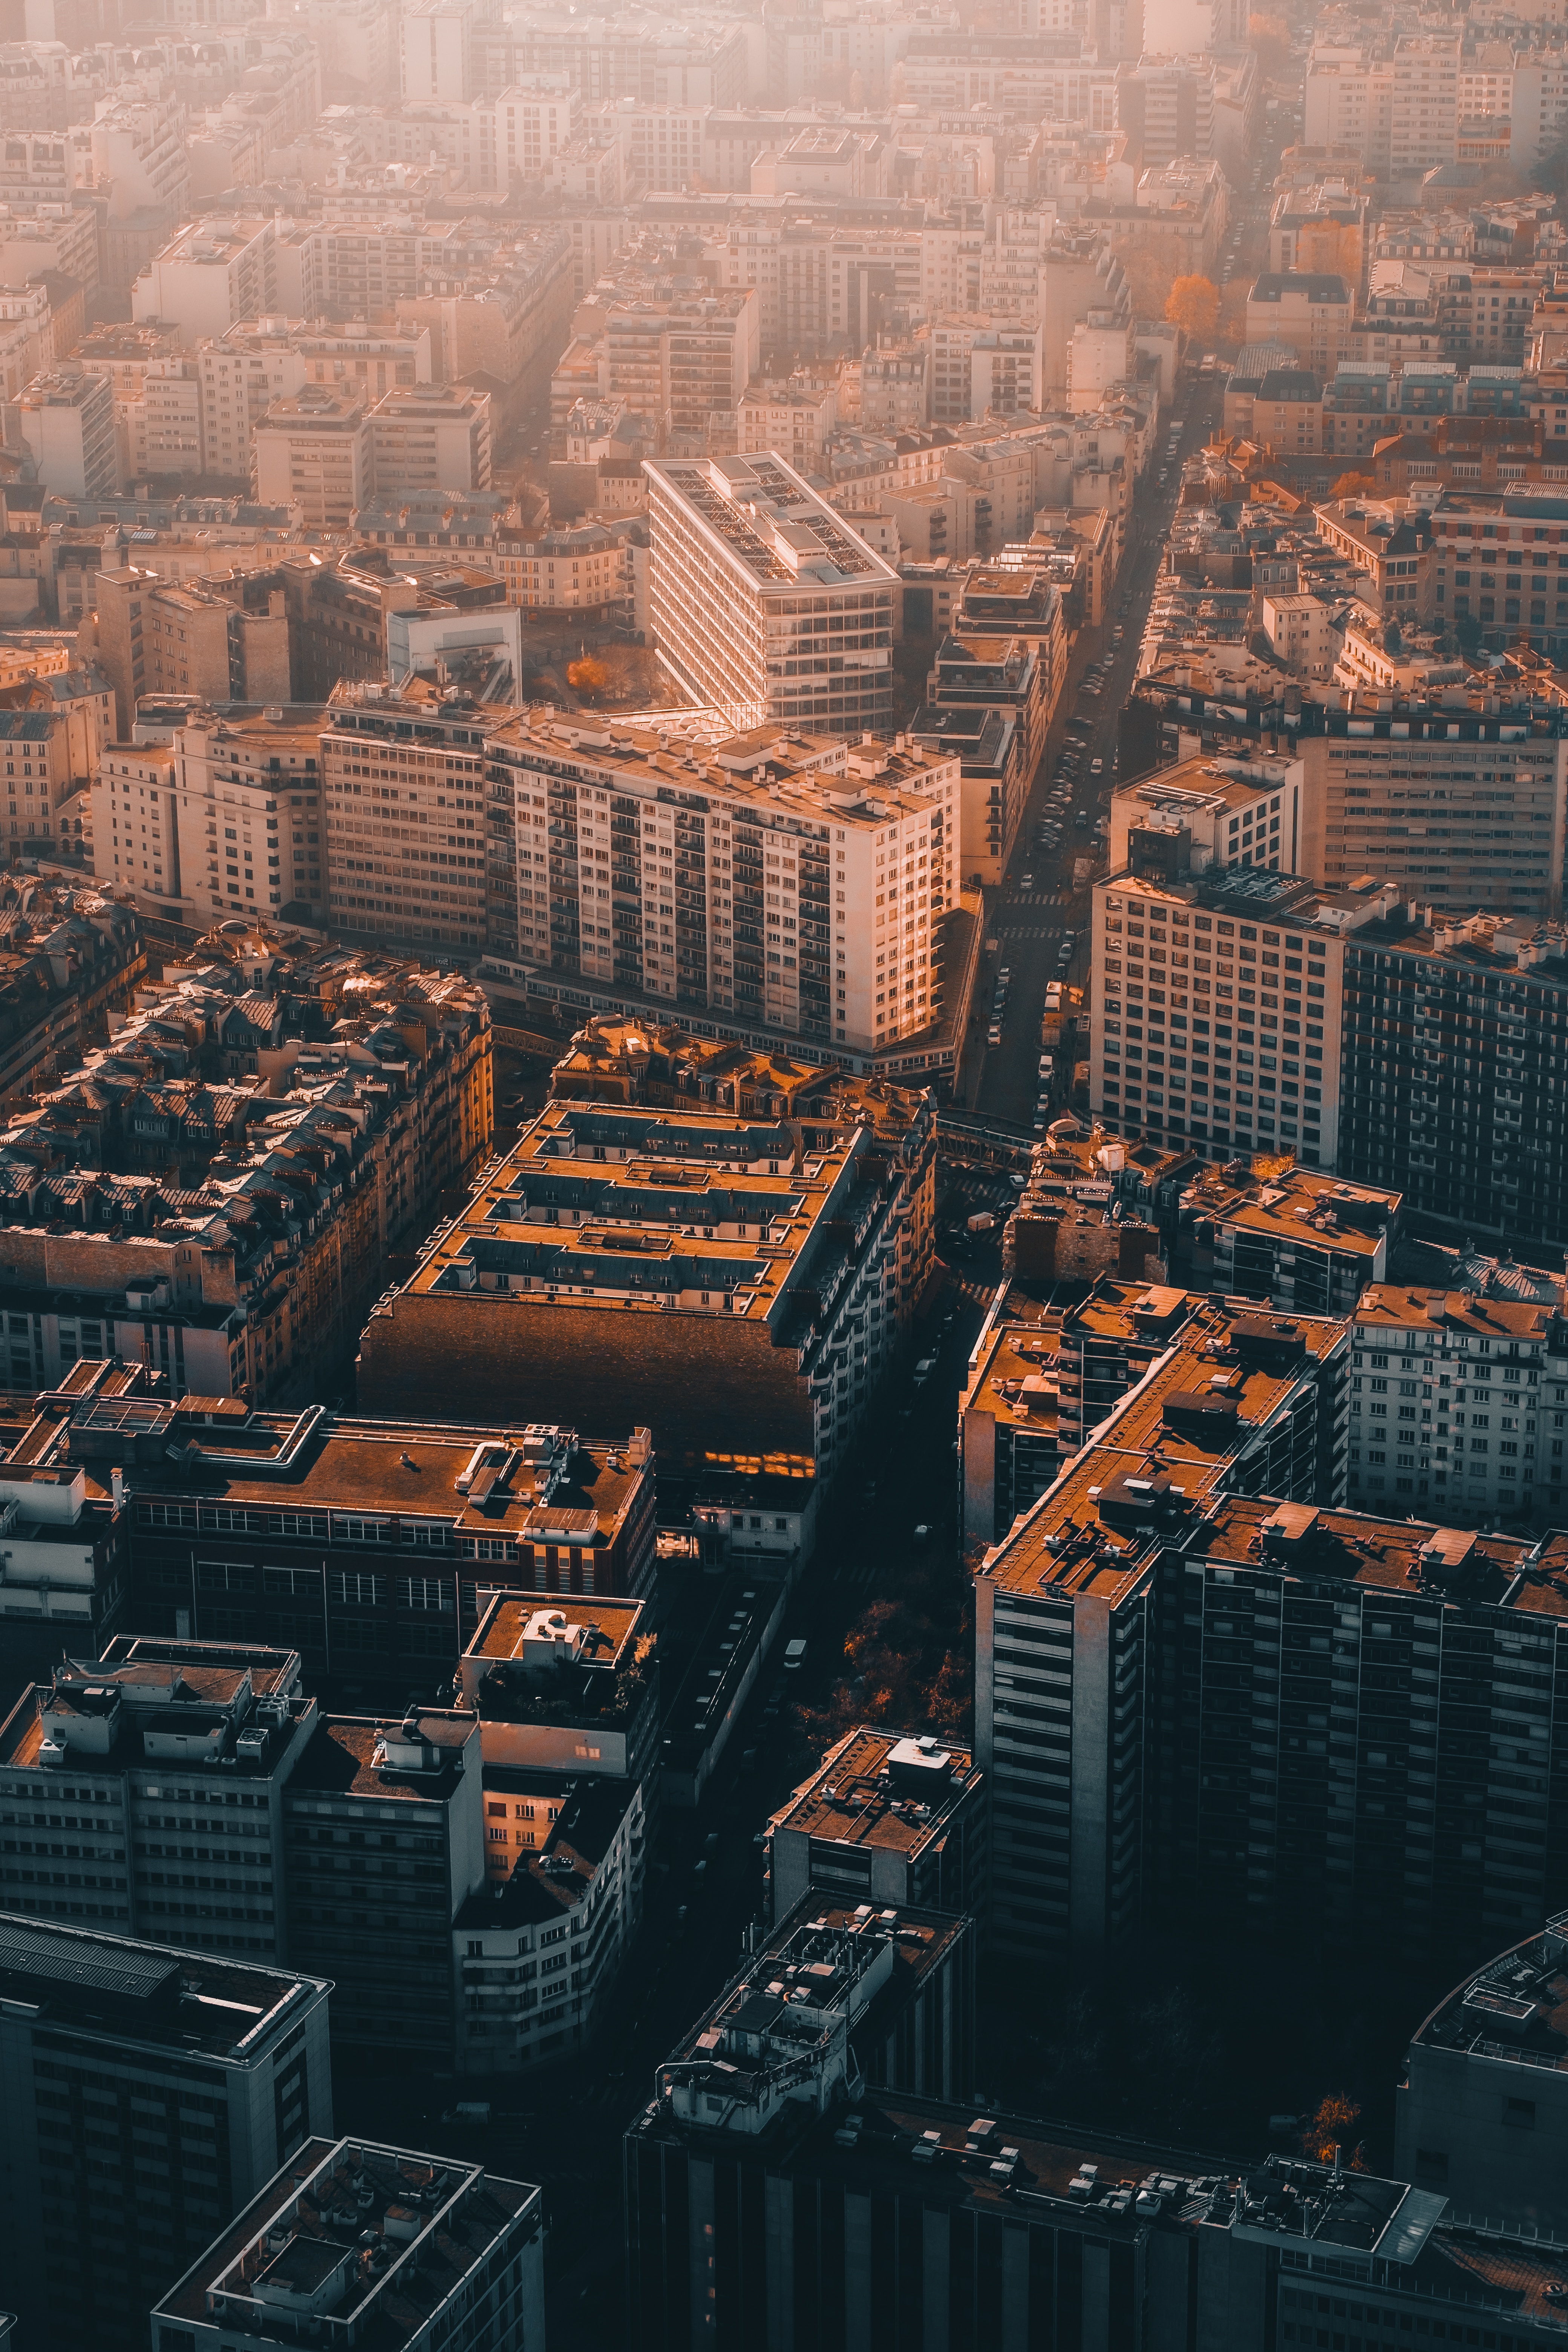 android cities, architecture, city, building, view from above, urban landscape, cityscape